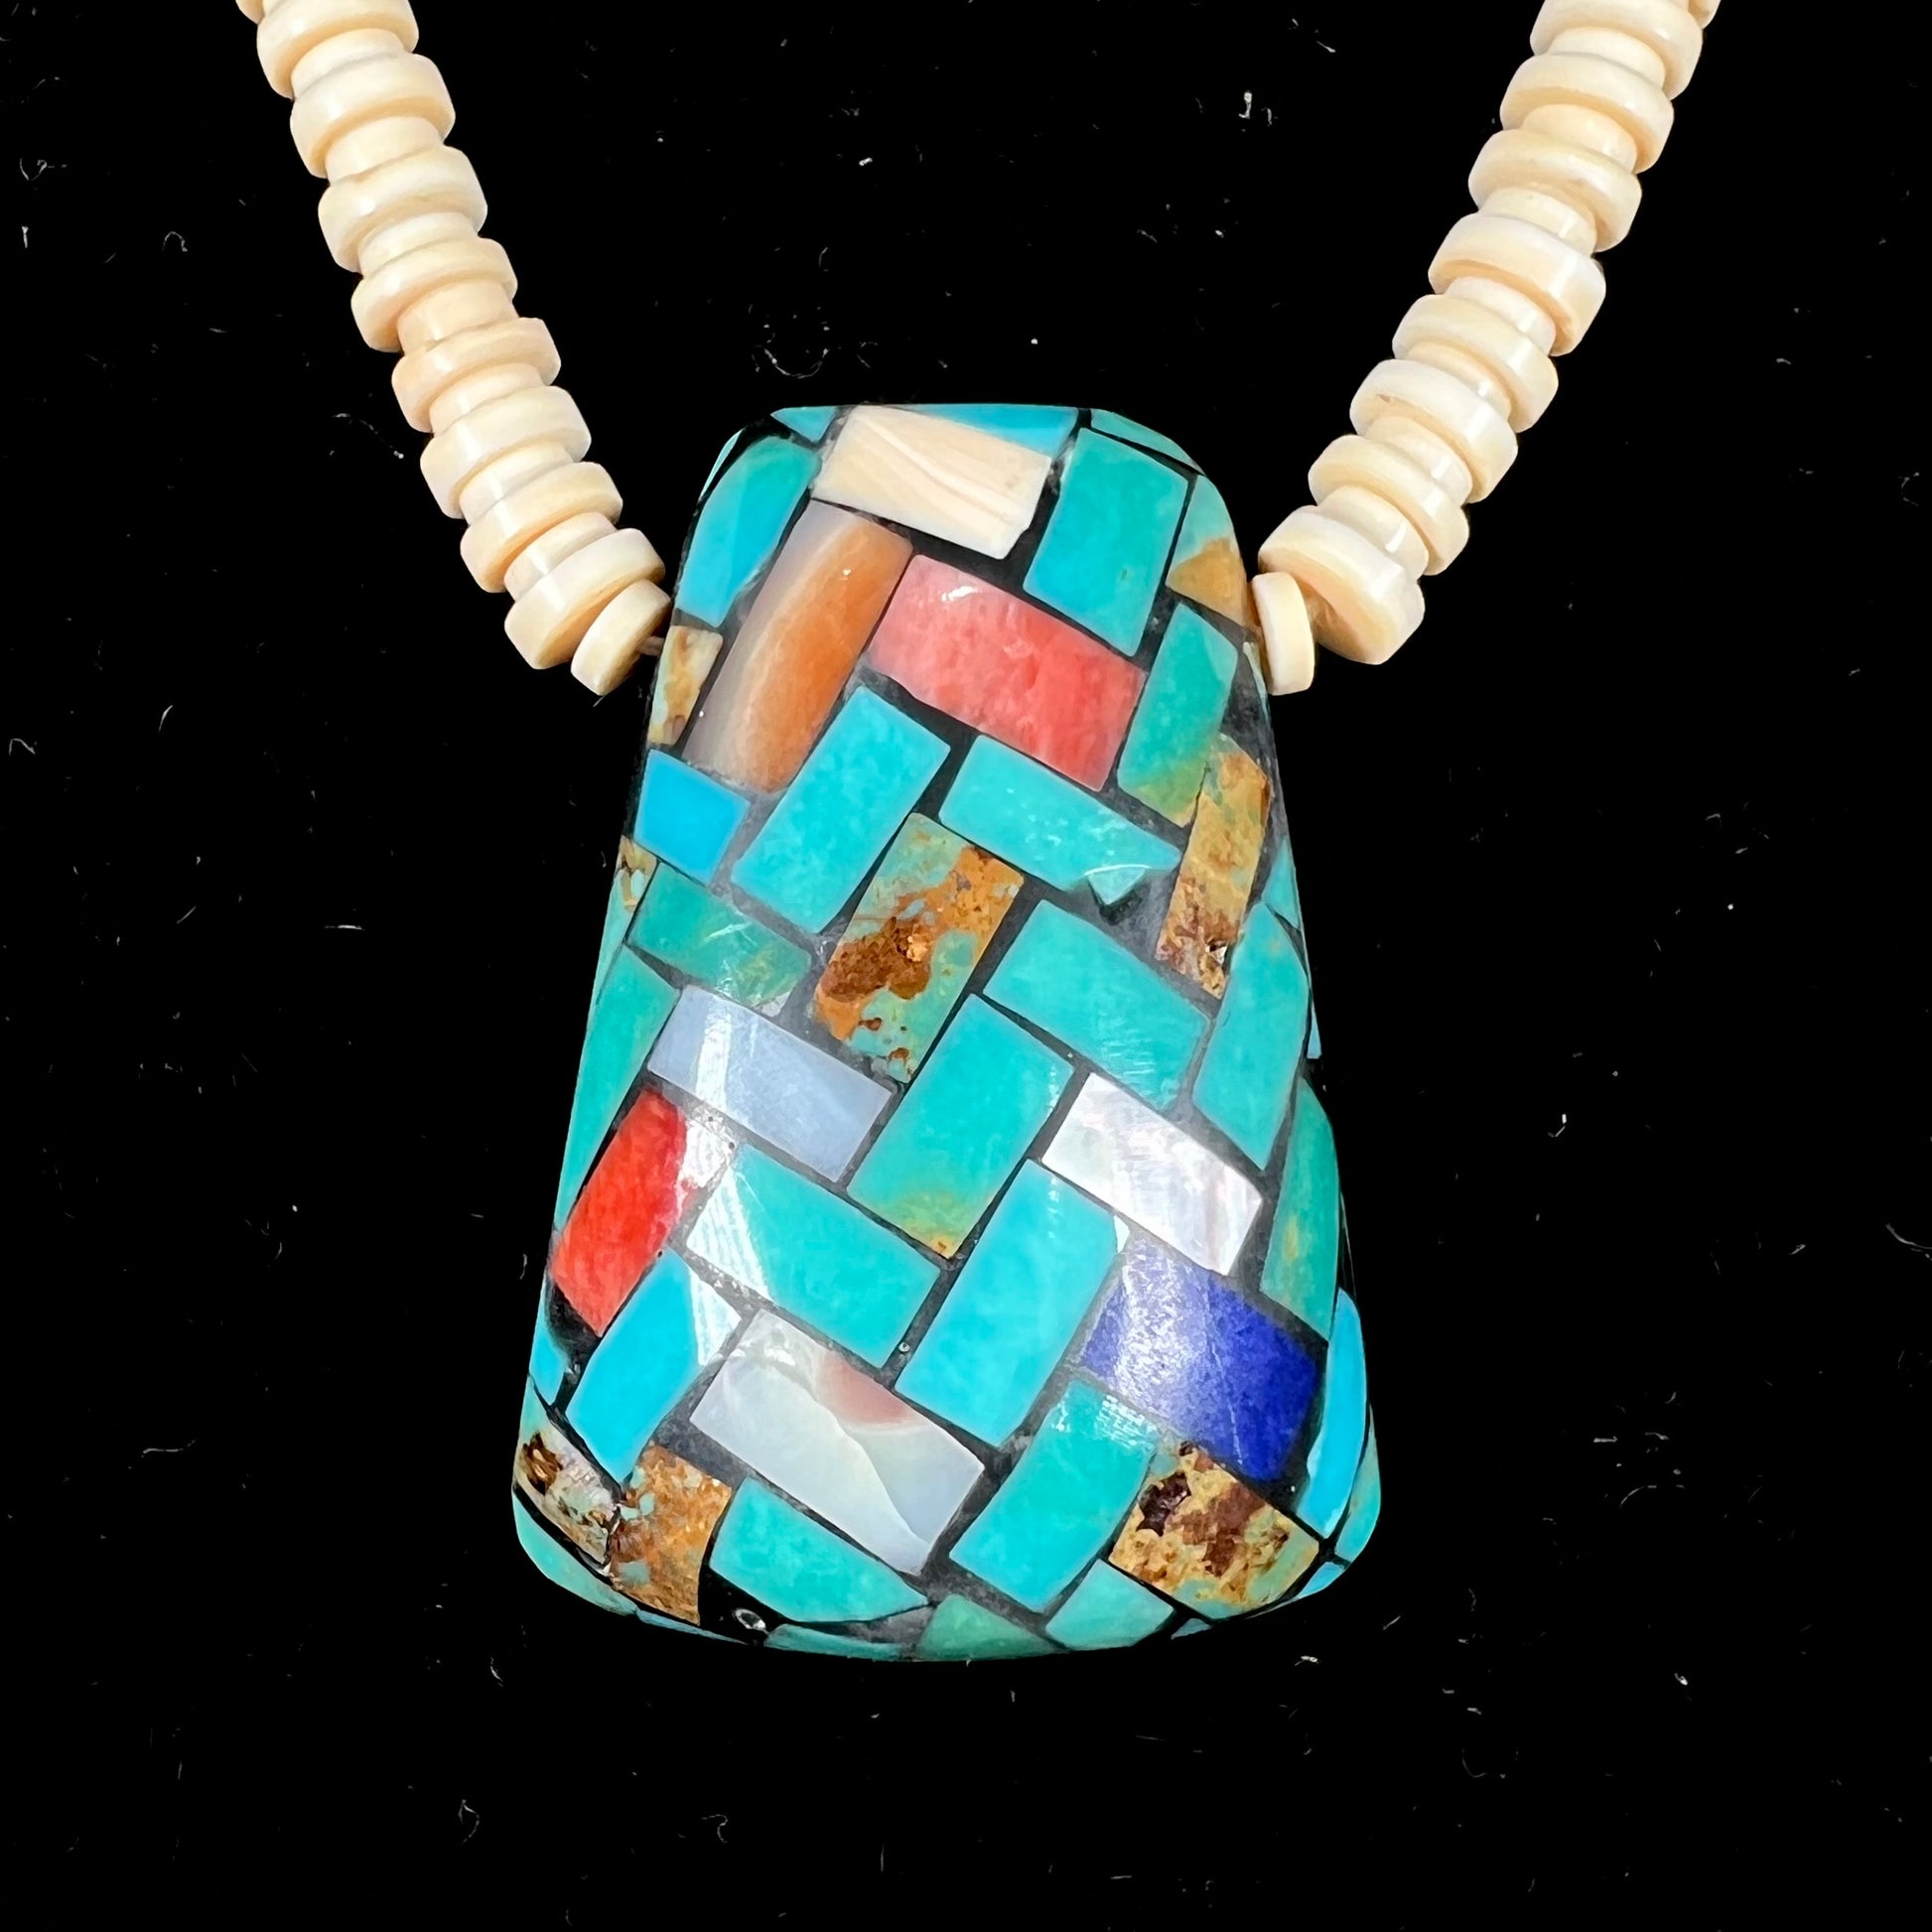 A three dimensional mosaic stone inlay pendant set with turquoise, lapis lazuli, coral, and mother of pearl on a puka shell necklace.